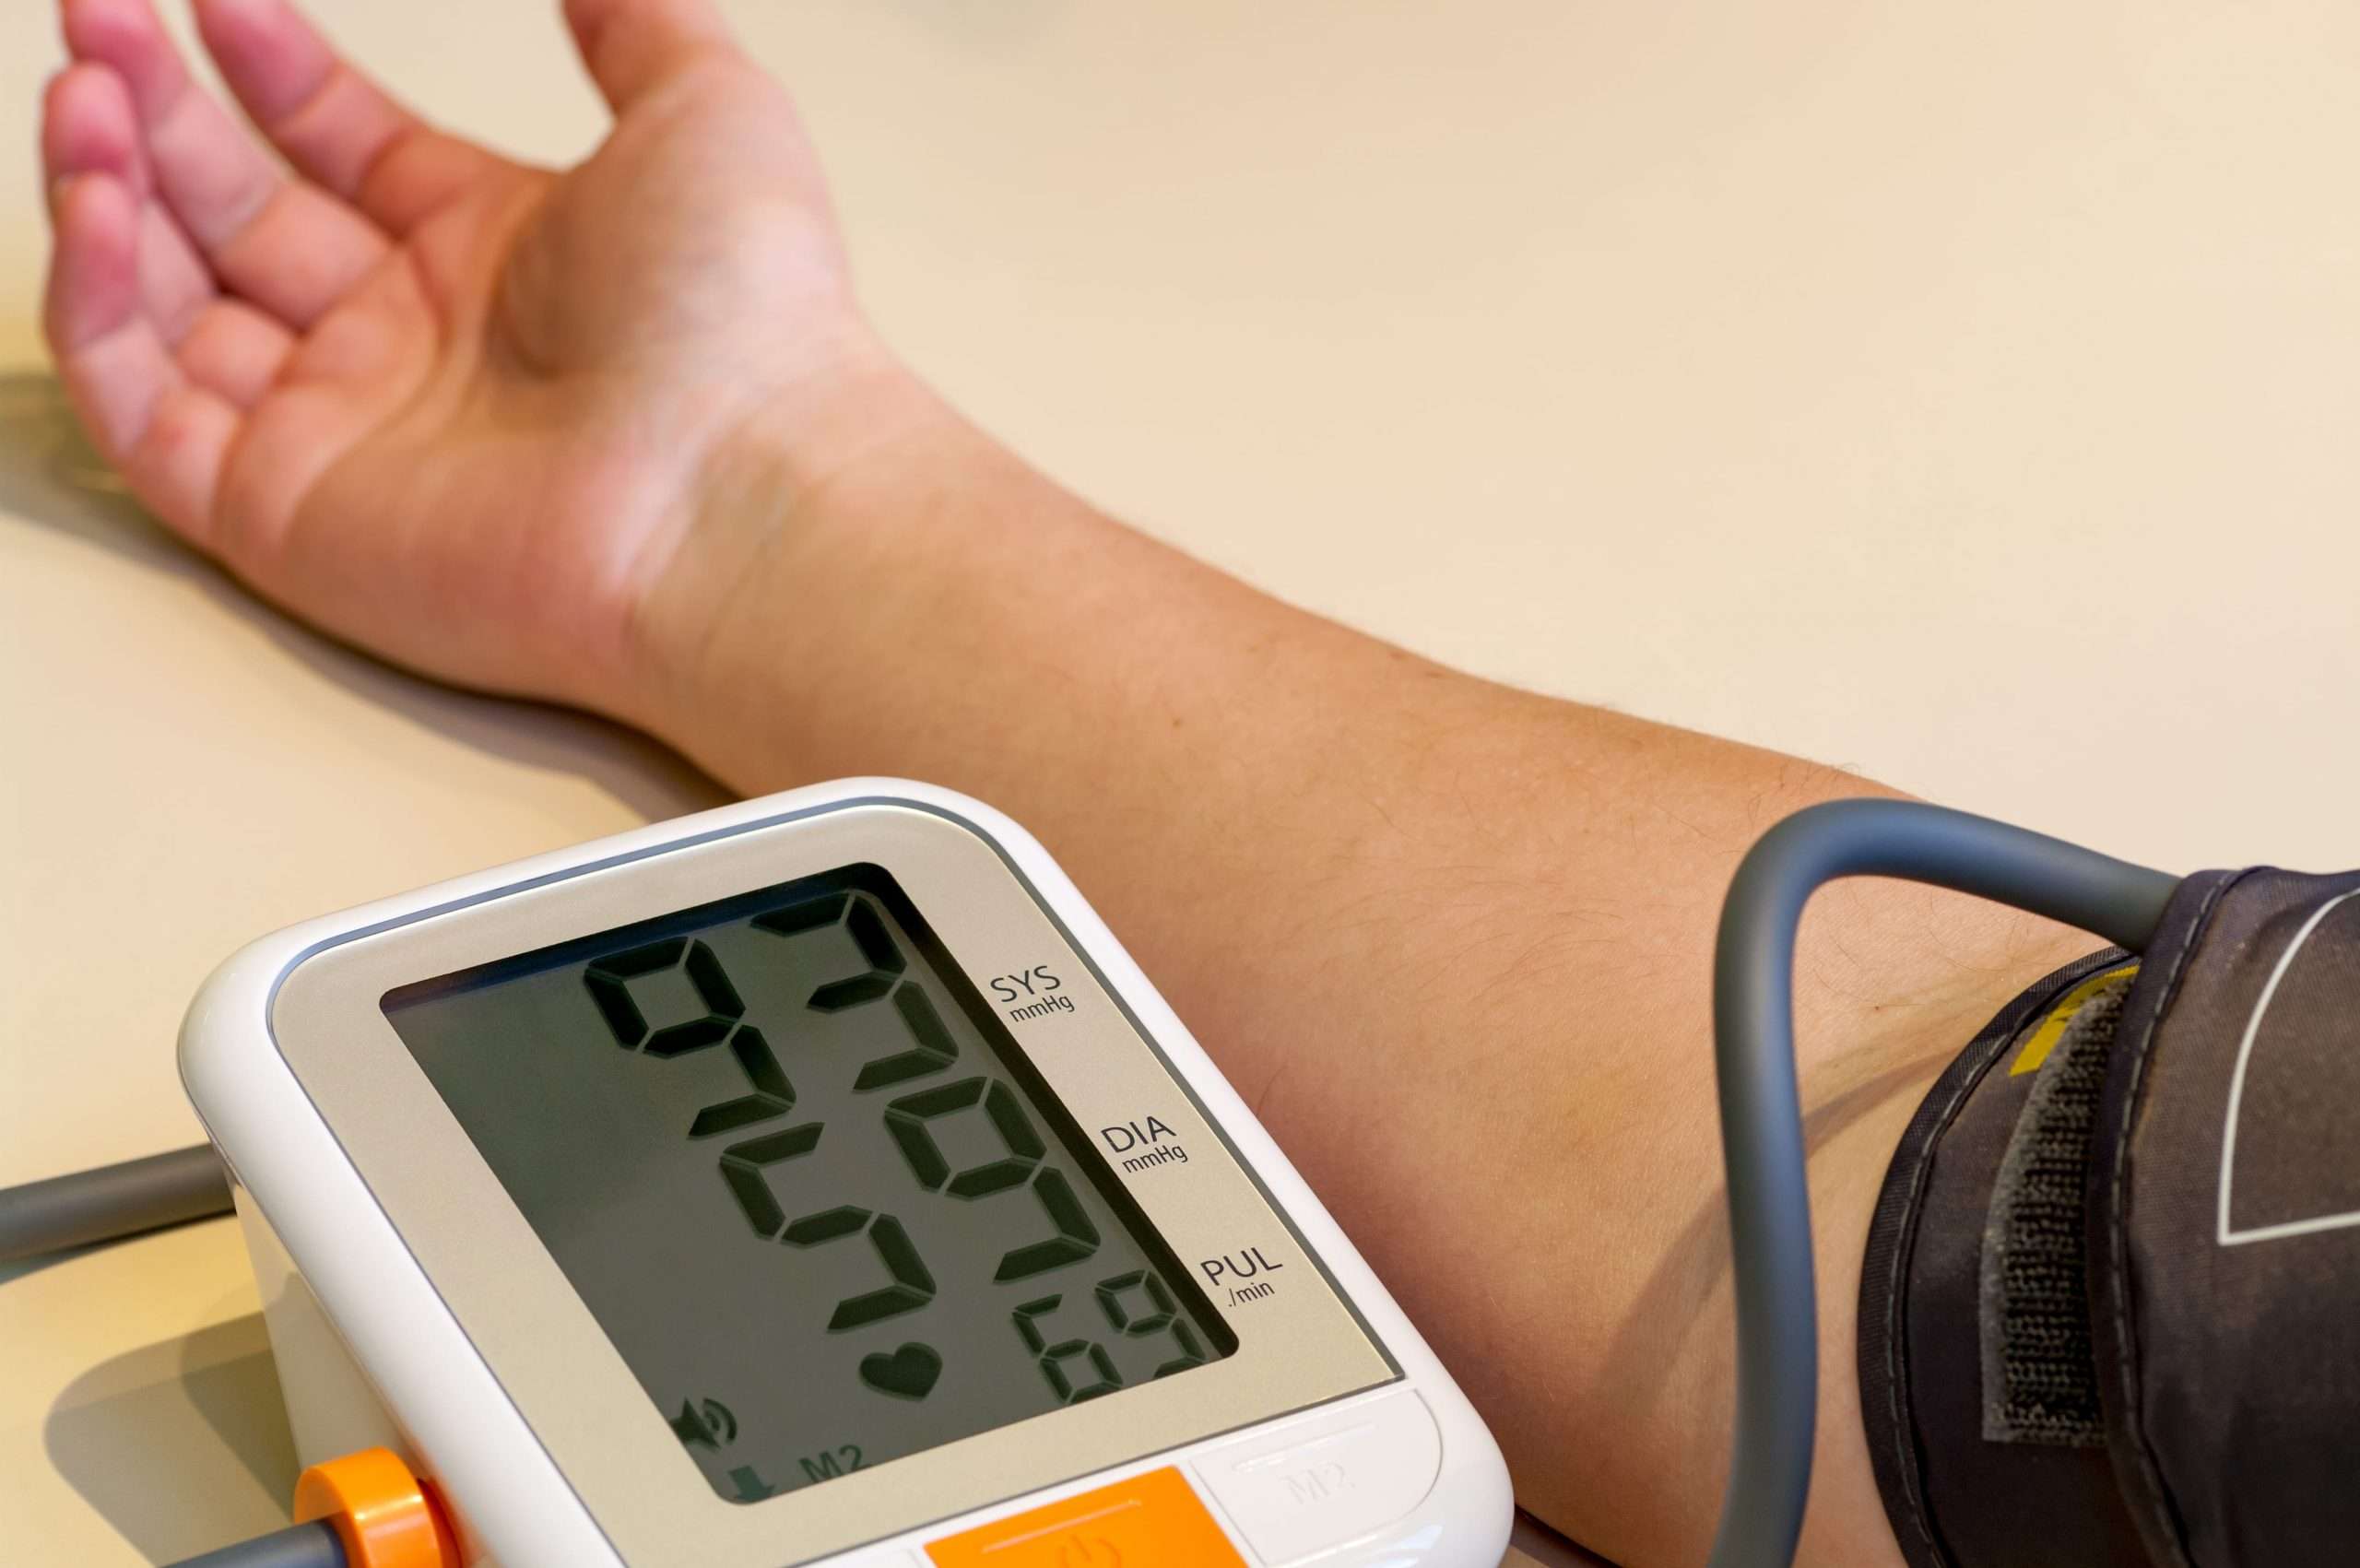 Lower Blood Pressure is NOT Better